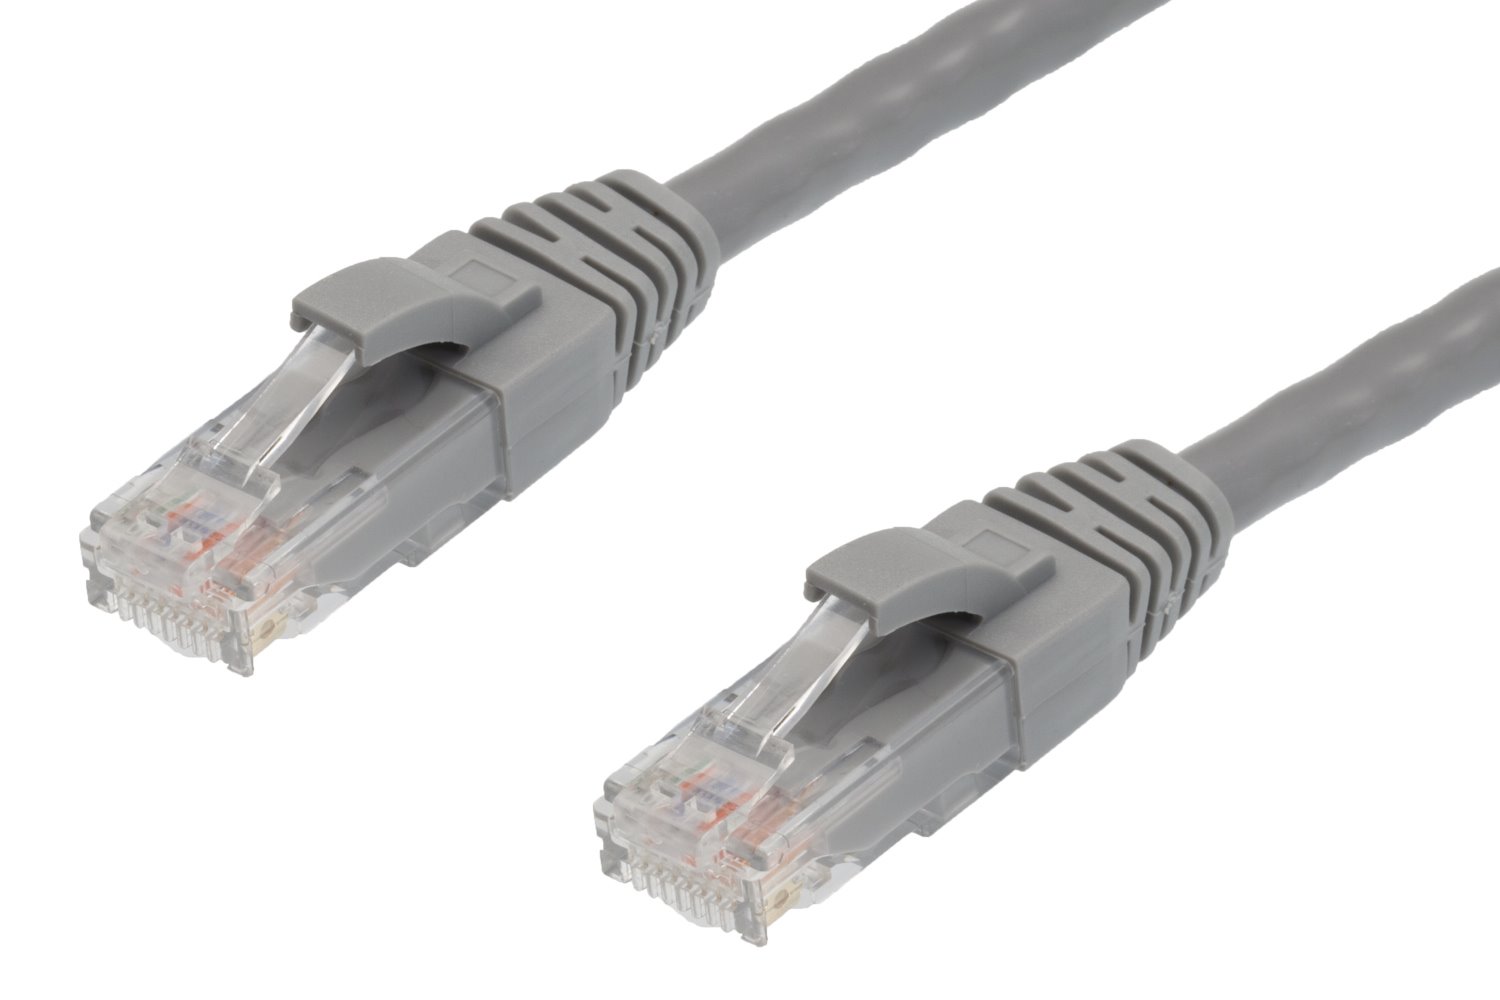 4Cabling 2M Cat 5E Ethernet Network Cable Grey